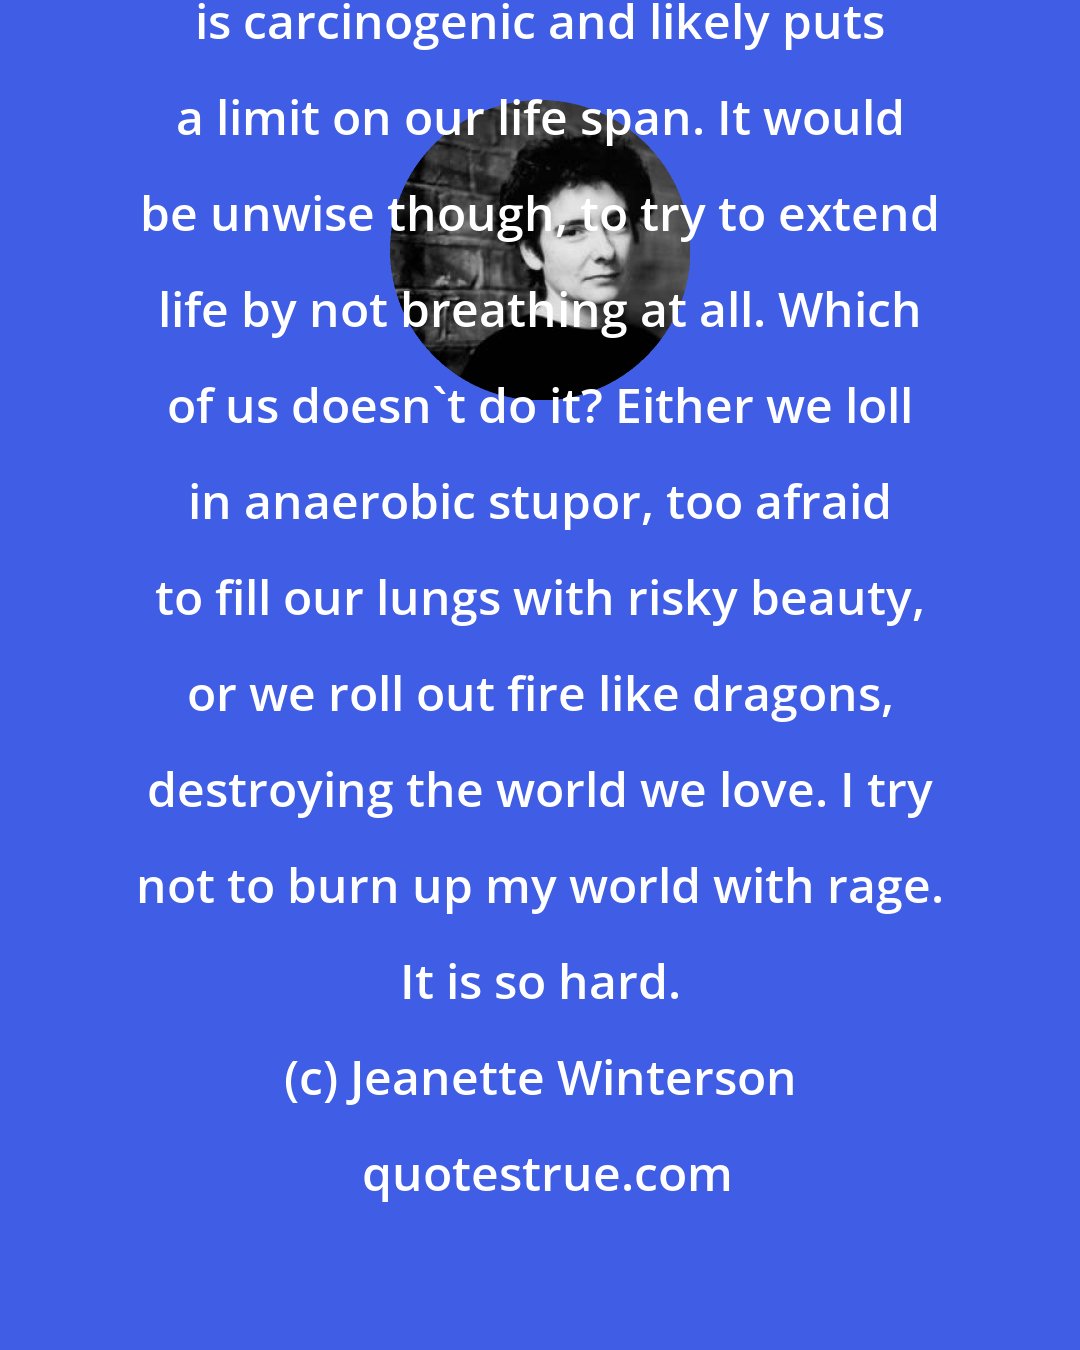 Jeanette Winterson: Breathe in, breath out. Oxygen is carcinogenic and likely puts a limit on our life span. It would be unwise though, to try to extend life by not breathing at all. Which of us doesn't do it? Either we loll in anaerobic stupor, too afraid to fill our lungs with risky beauty, or we roll out fire like dragons, destroying the world we love. I try not to burn up my world with rage. It is so hard.